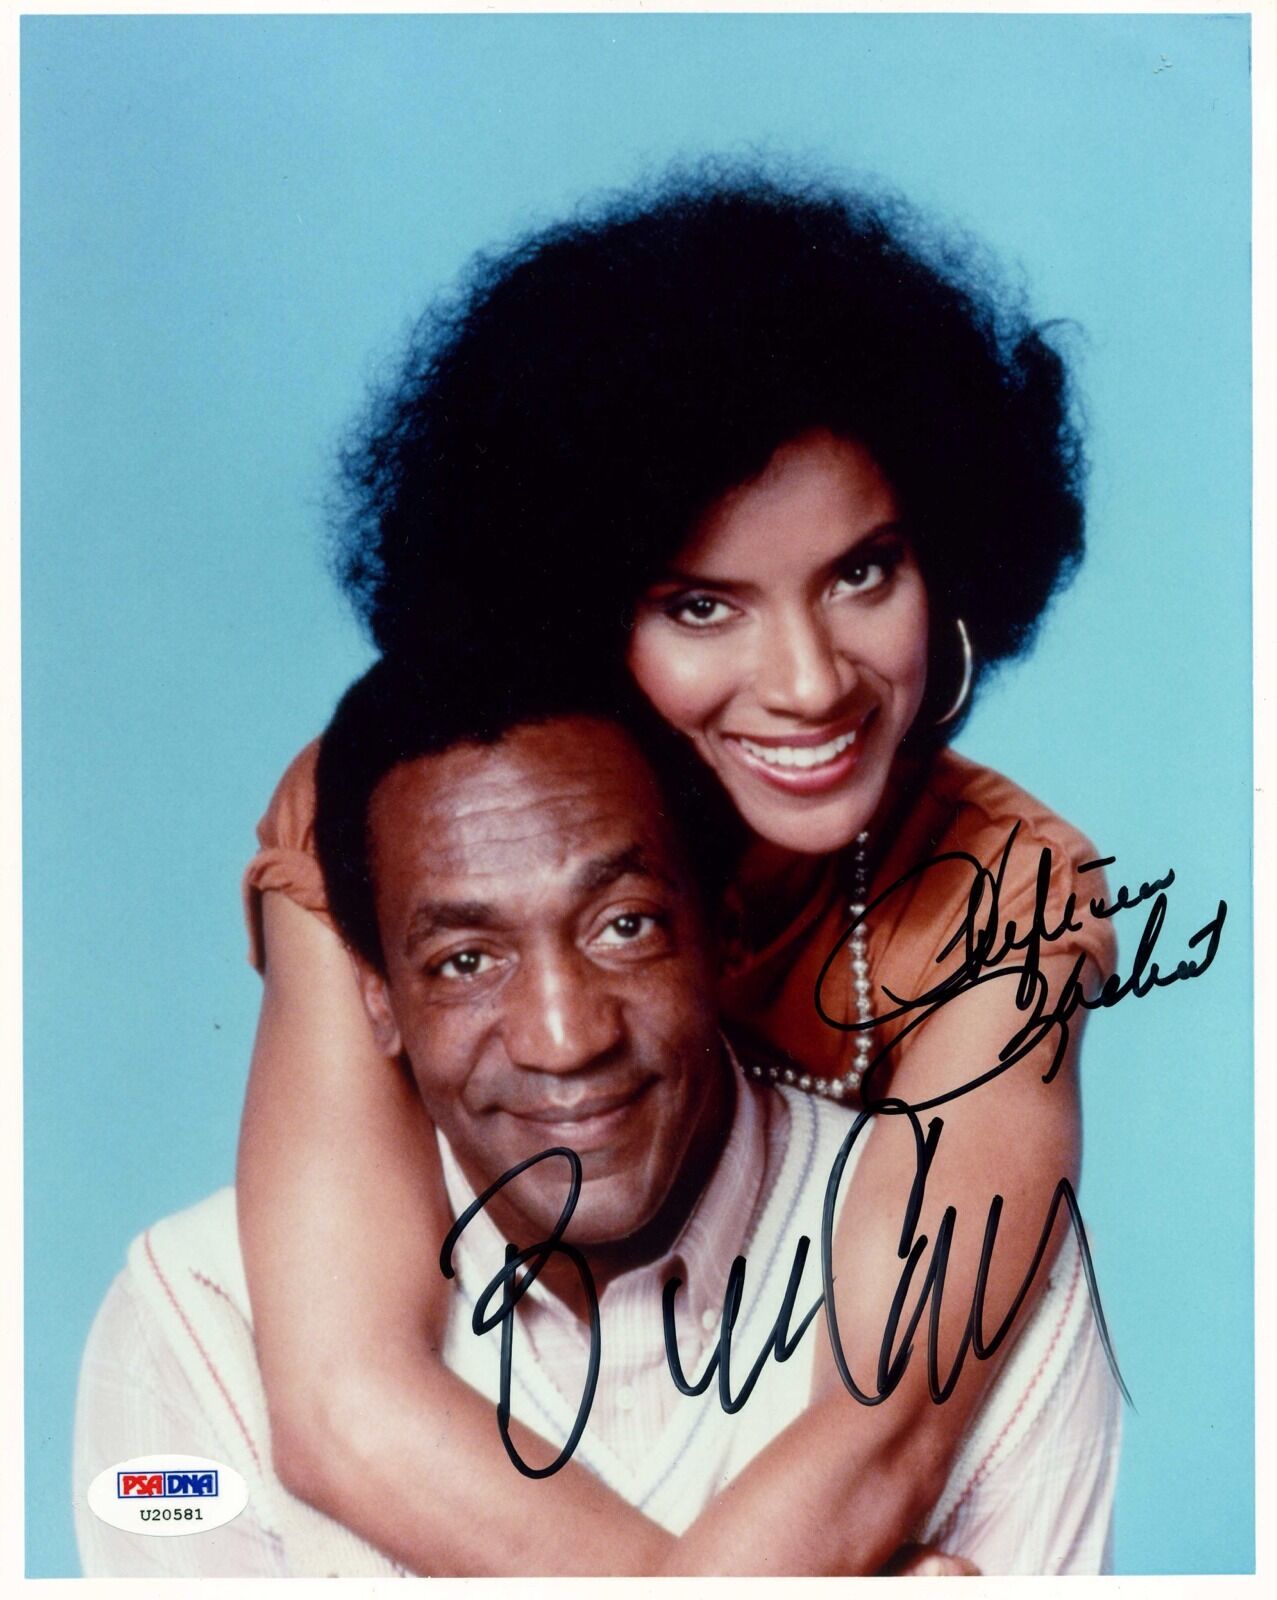 Bill Cosby Autographed Signed & Phylicia Rashad 8X10 Authentic Photo PSA/DNA#20581 